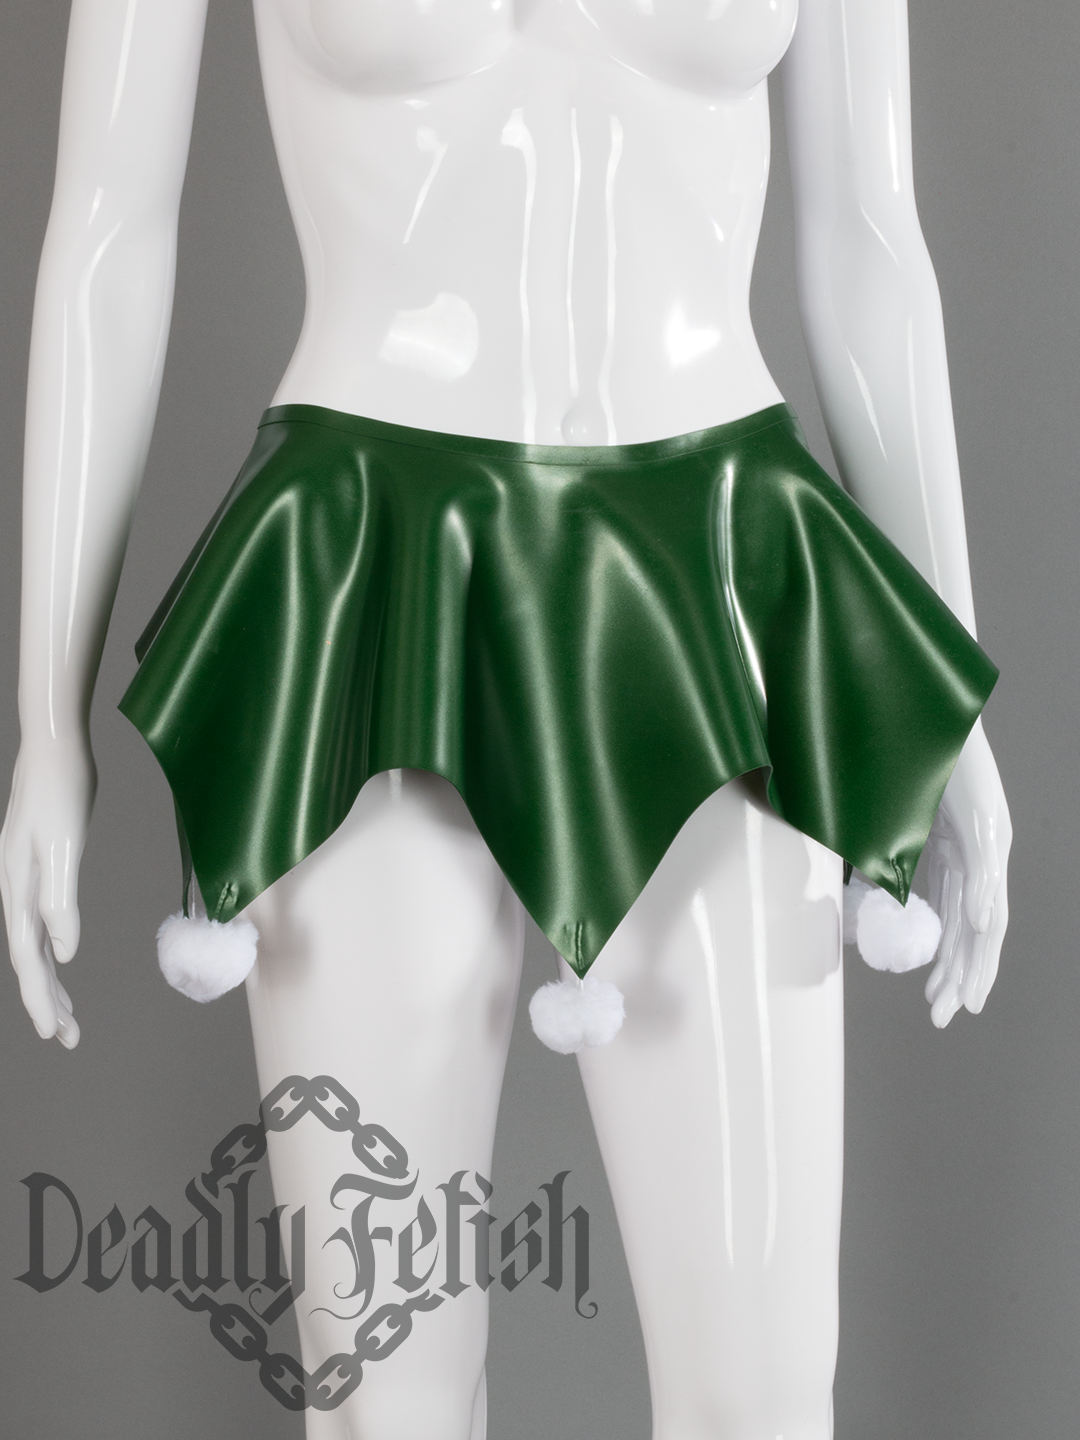 Deadly Fetish Latex: Skirt #14 Holiday Edition